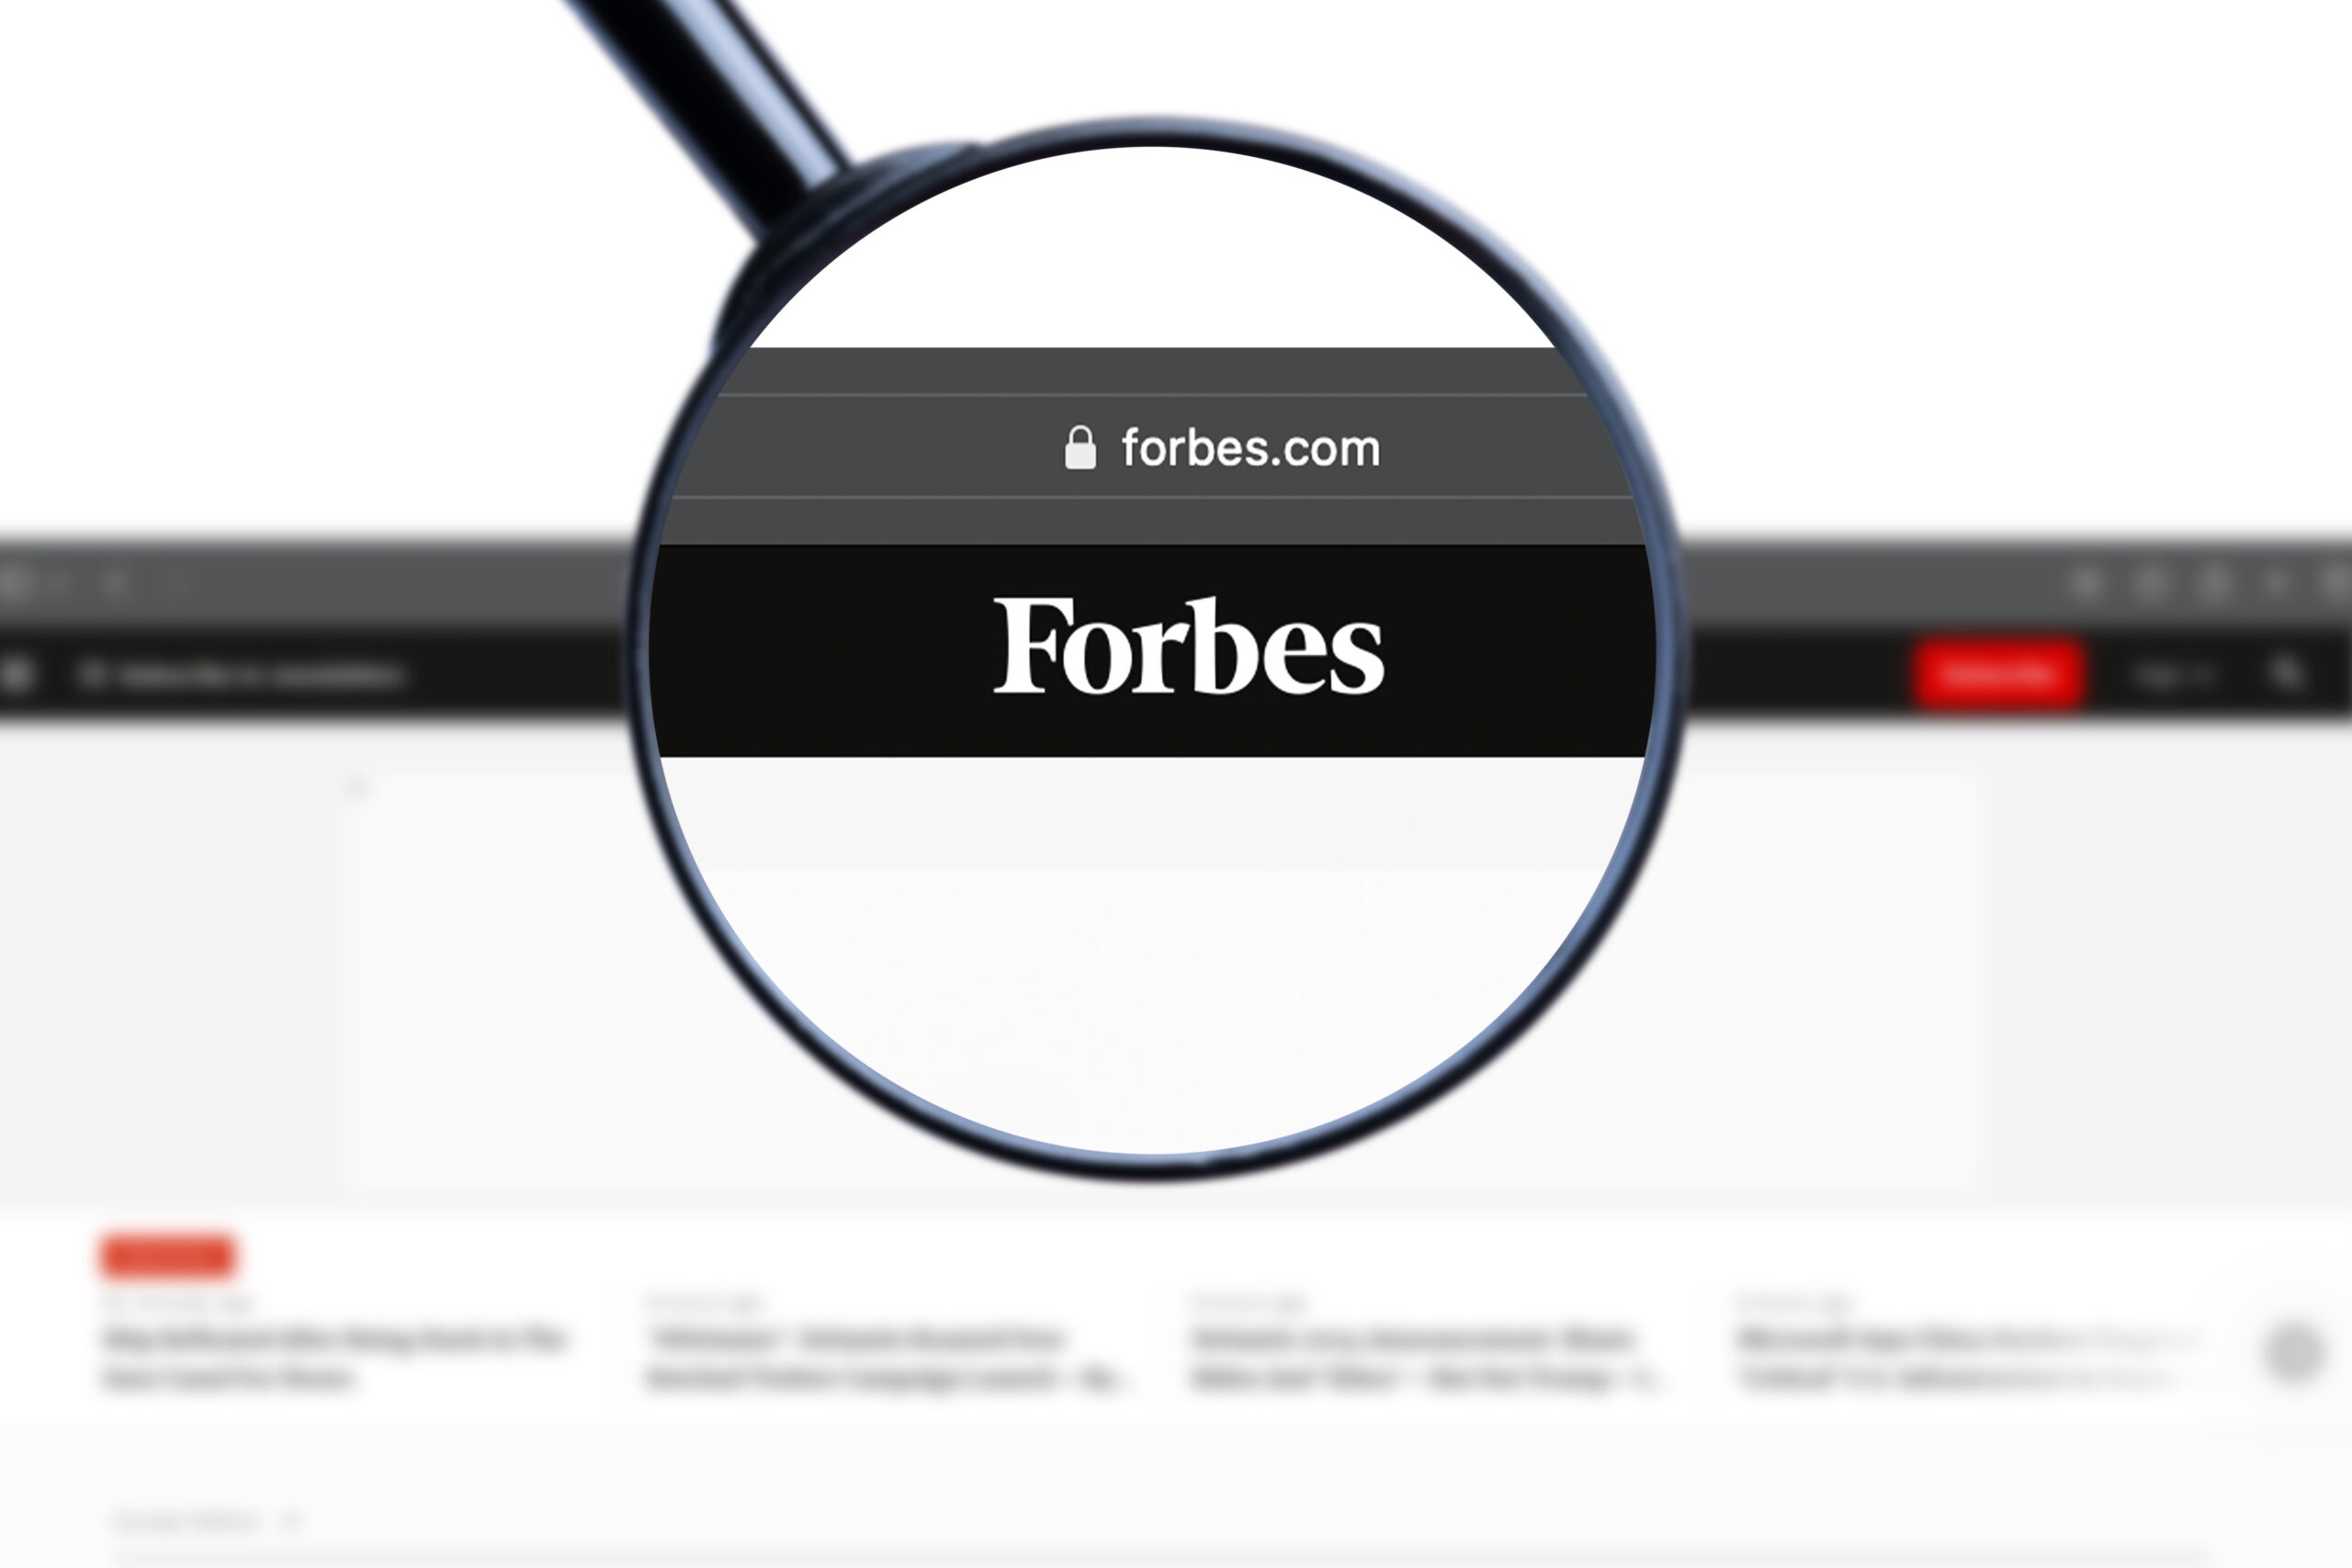 picture of the forbes website